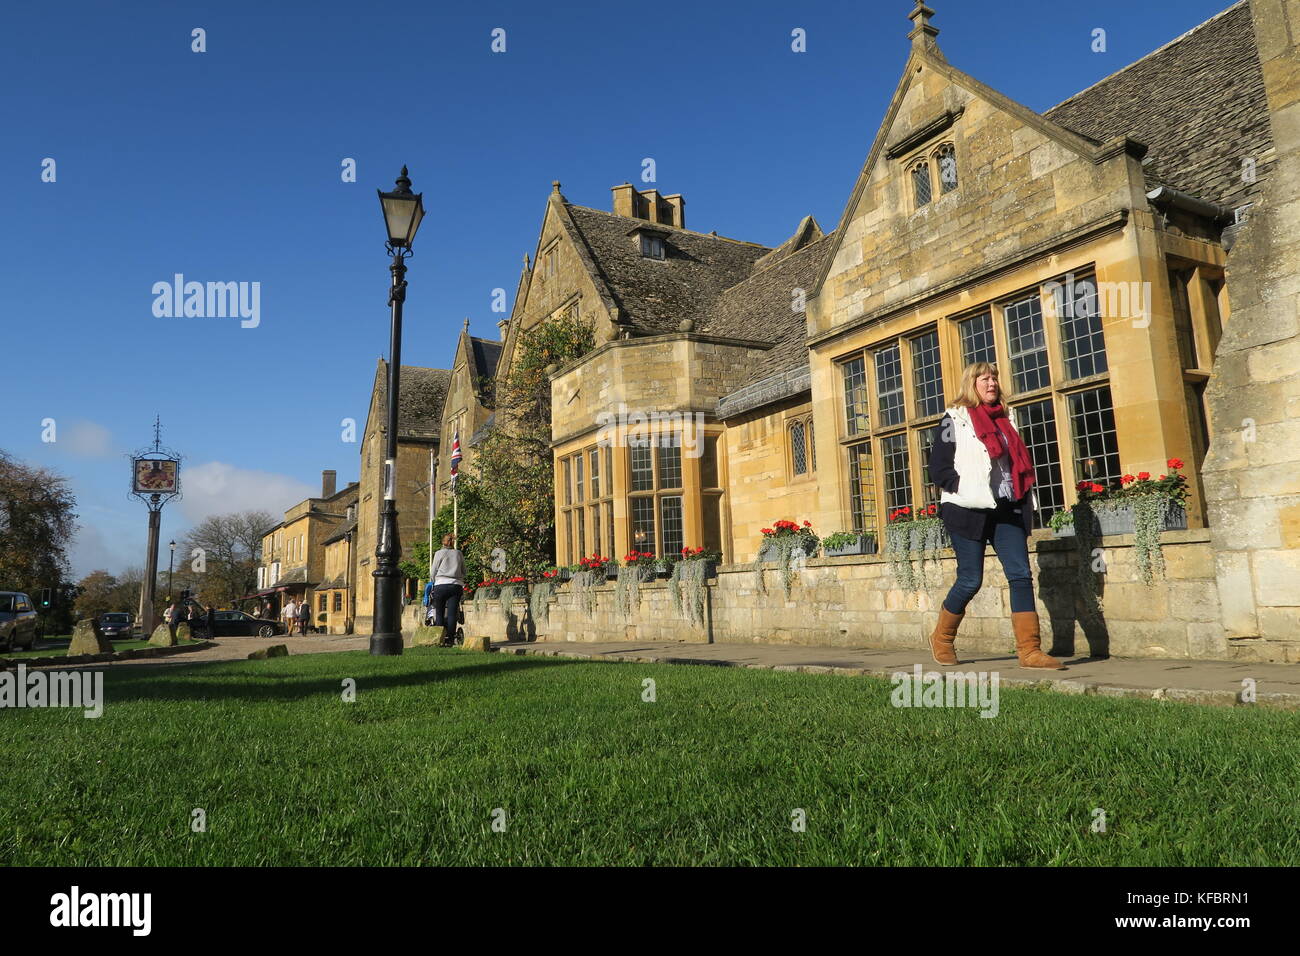 Broadway, Worcestershire, UK. 26th October, 2017. Glorious sunshine in the beautiful Cotswold town of Broadway as the half term holiday week comes to a close  Photo Central / Alamy LiveNews Stock Photo